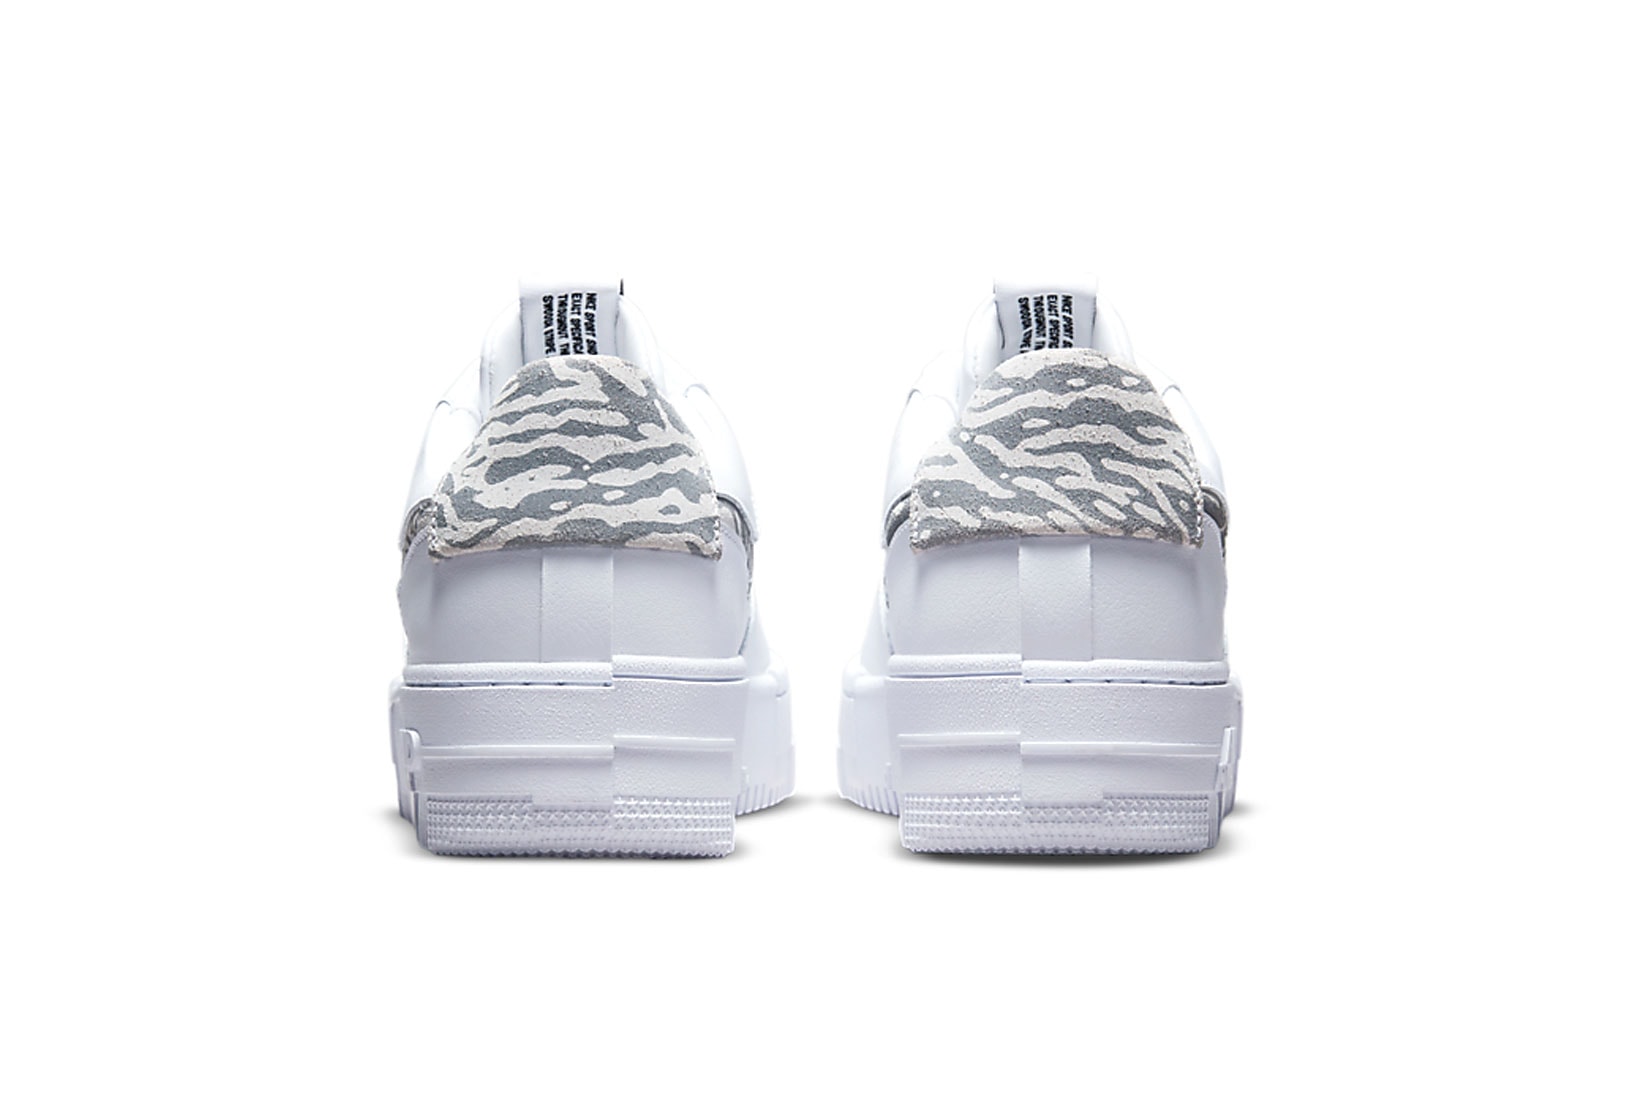 Back view of Nike Air Force 1 SE Pixel